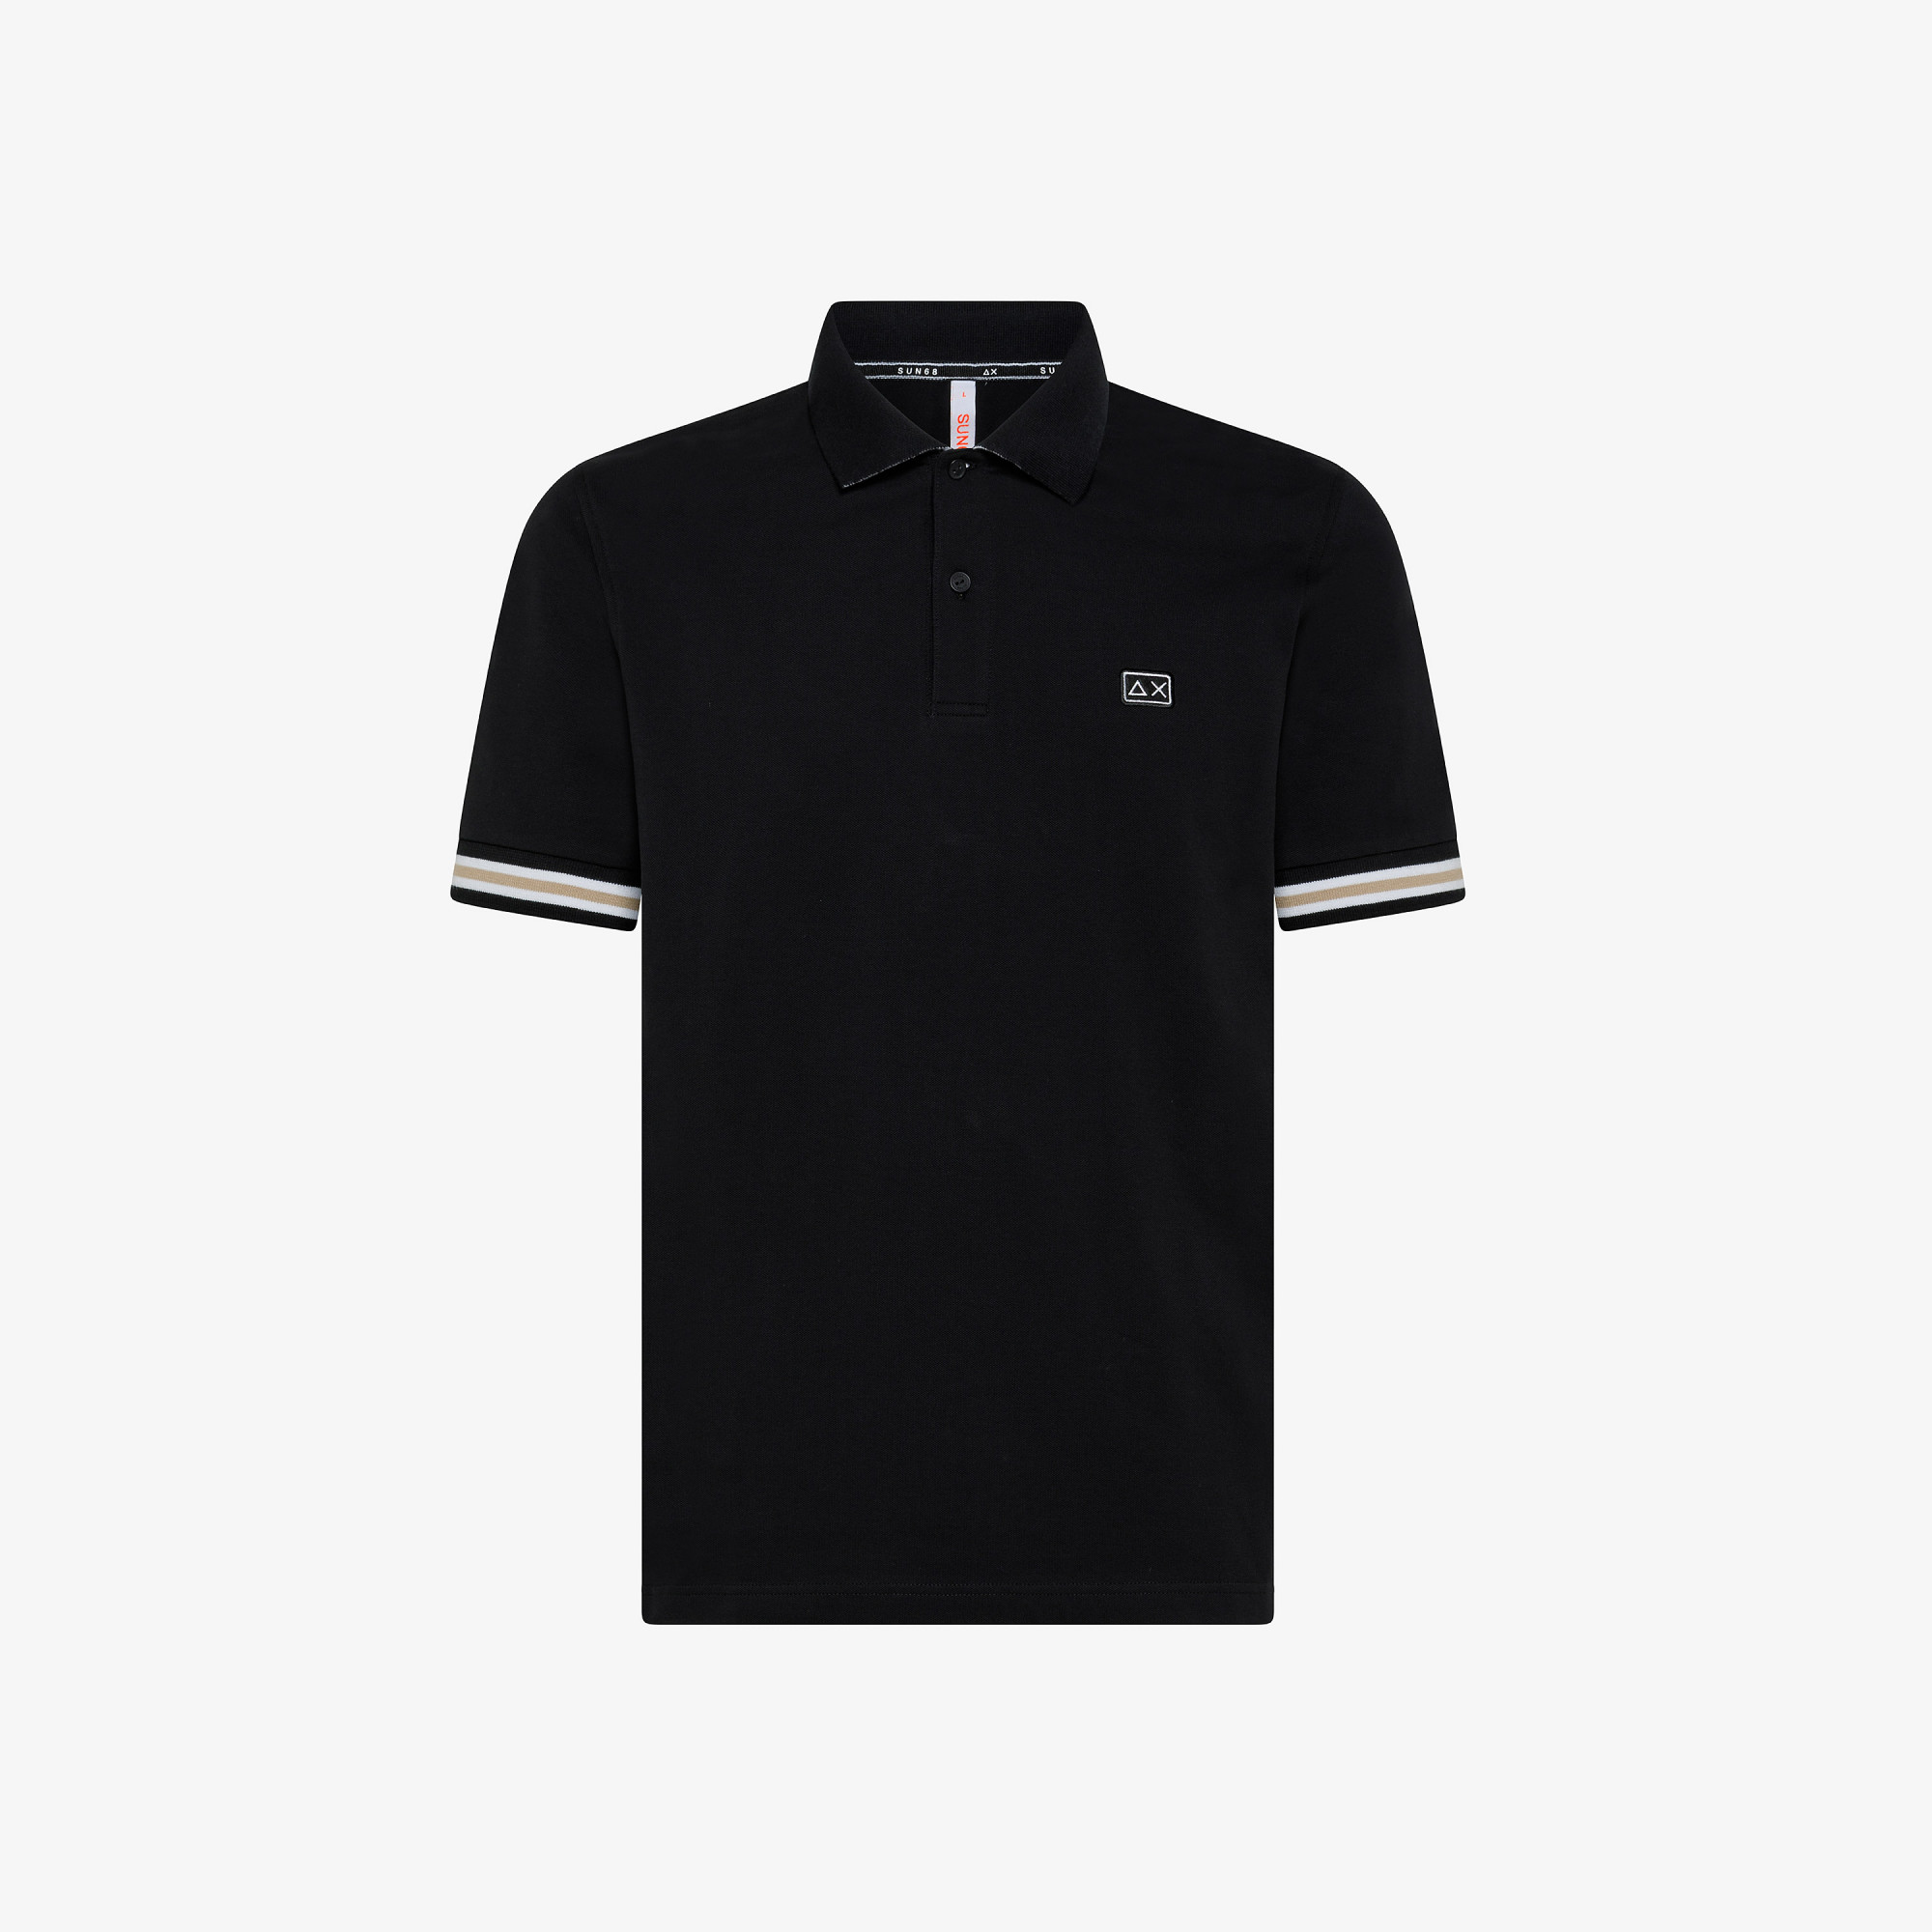 POLO STRIPES ON FRONT PLACKET AND CUFFS EL. BLACK